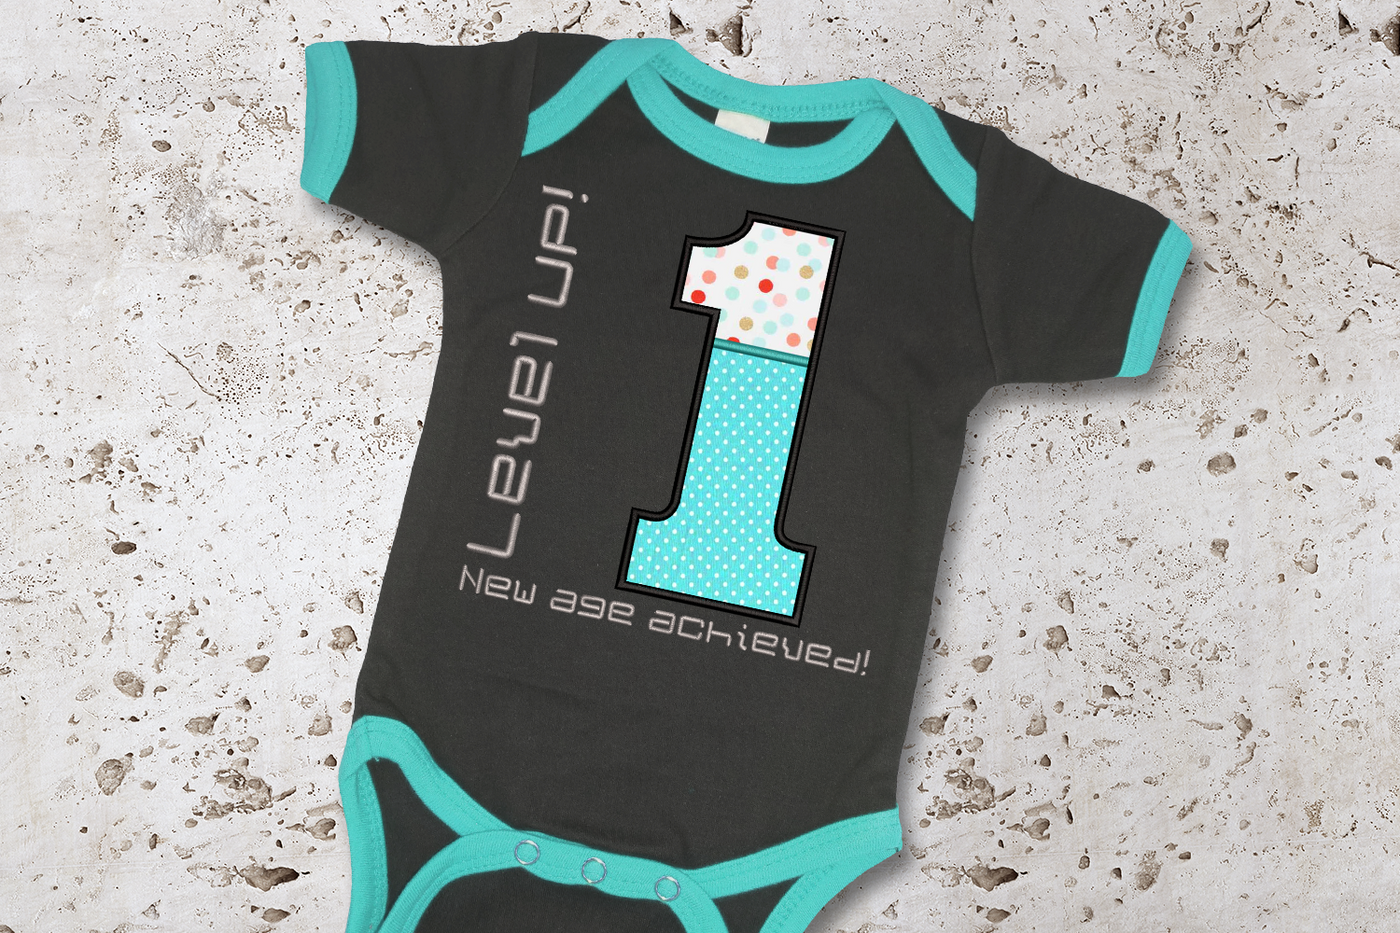 Baby onesie with a large applique 1. Around the 1 is embroidered "Level UP! New age achieved!"